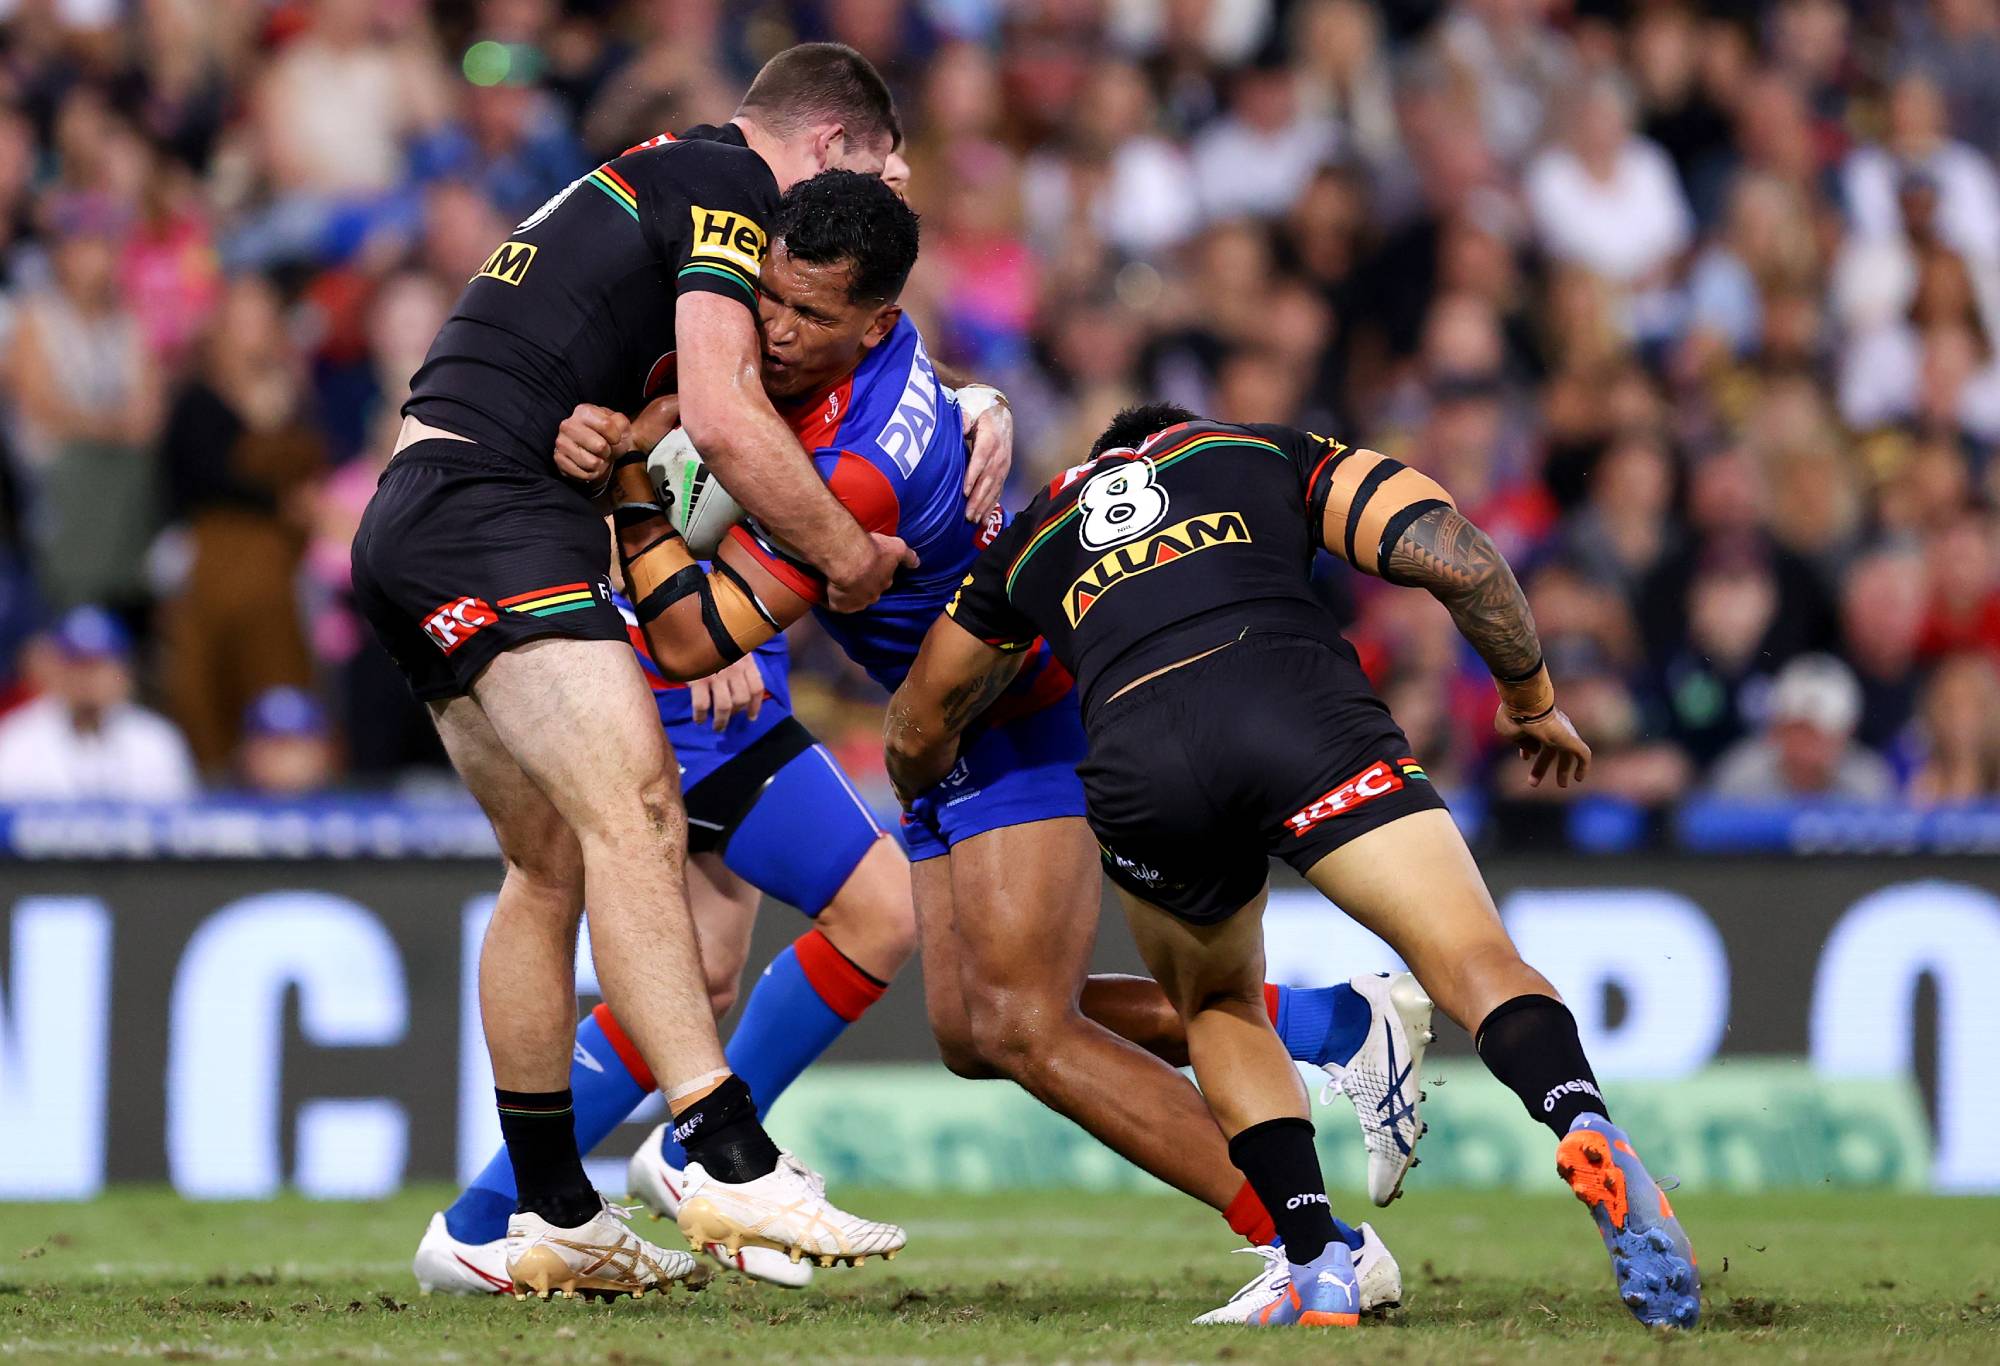 NEWCASTLE, AUSTRALIA - APRIL 15: Daniel Saifiti of the Knights is tackled by the Panthers defence during the round seven NRL match between Newcastle Knights and Penrith Panthers at McDonald Jones Stadium on April 15, 2023 in Newcastle, Australia. (Photo by Brendon Thorne/Getty Images)